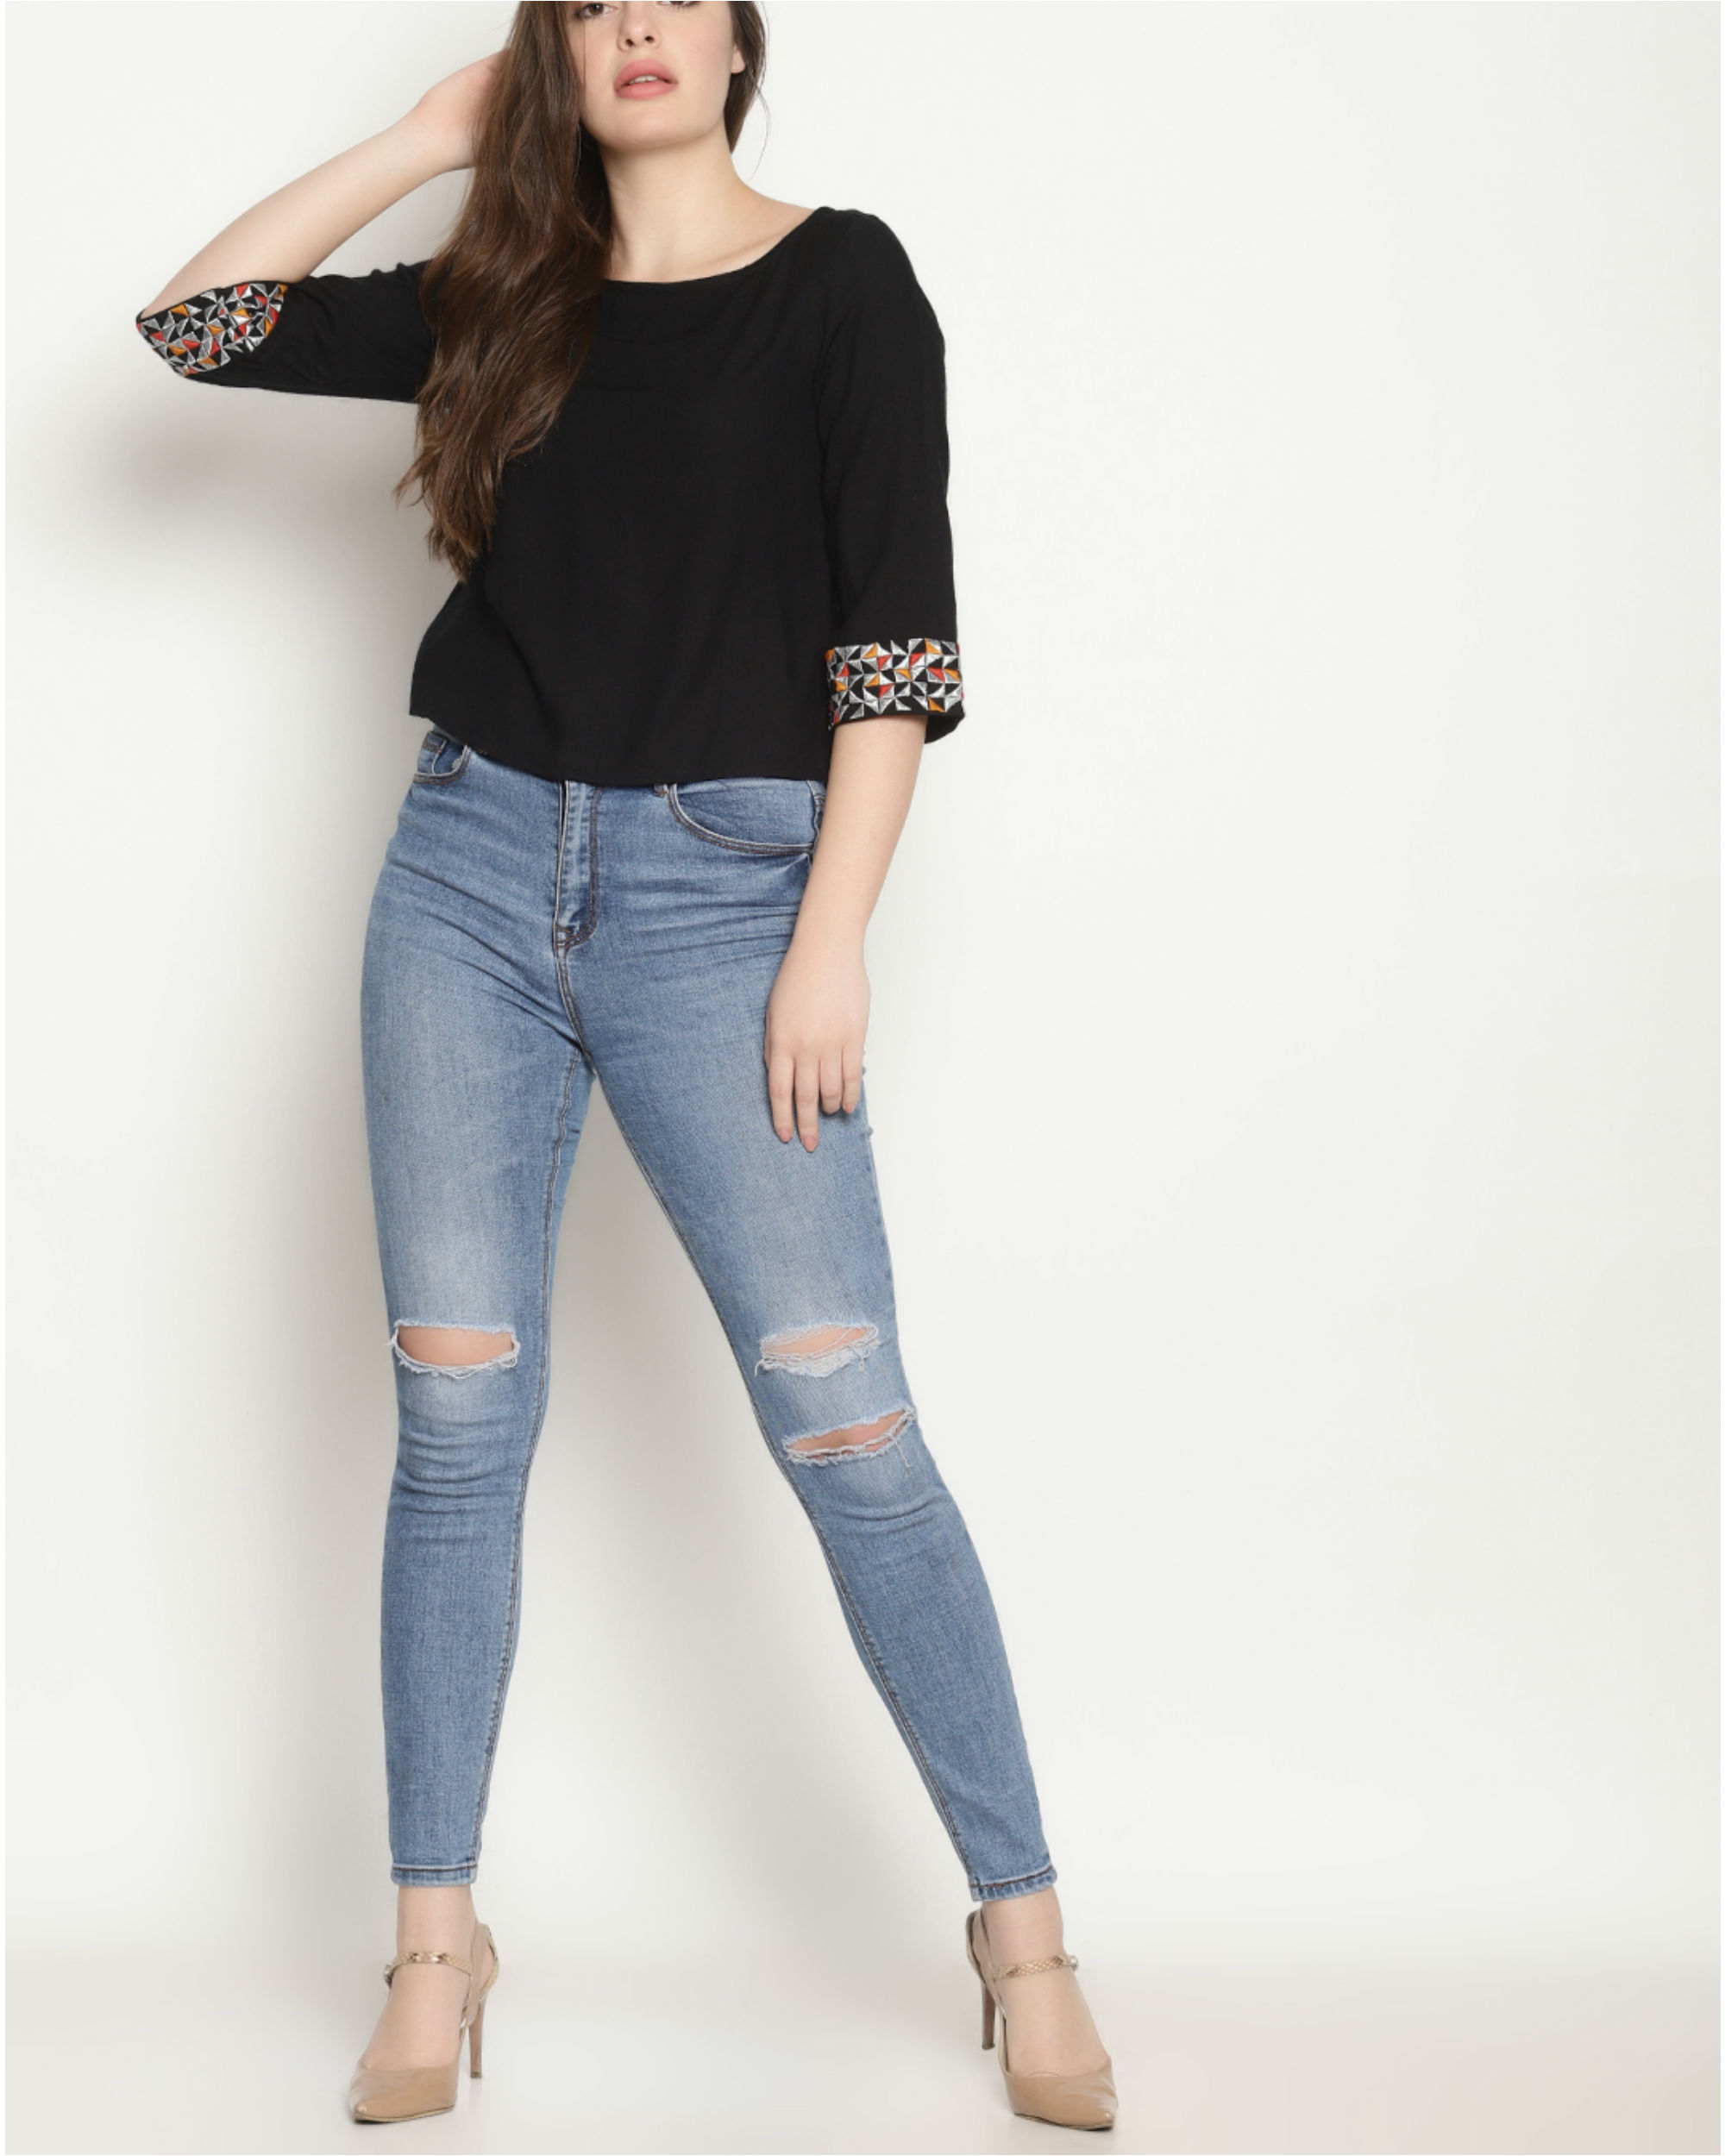 Black embroidered sleeve top UNTUNG | The Secret Label